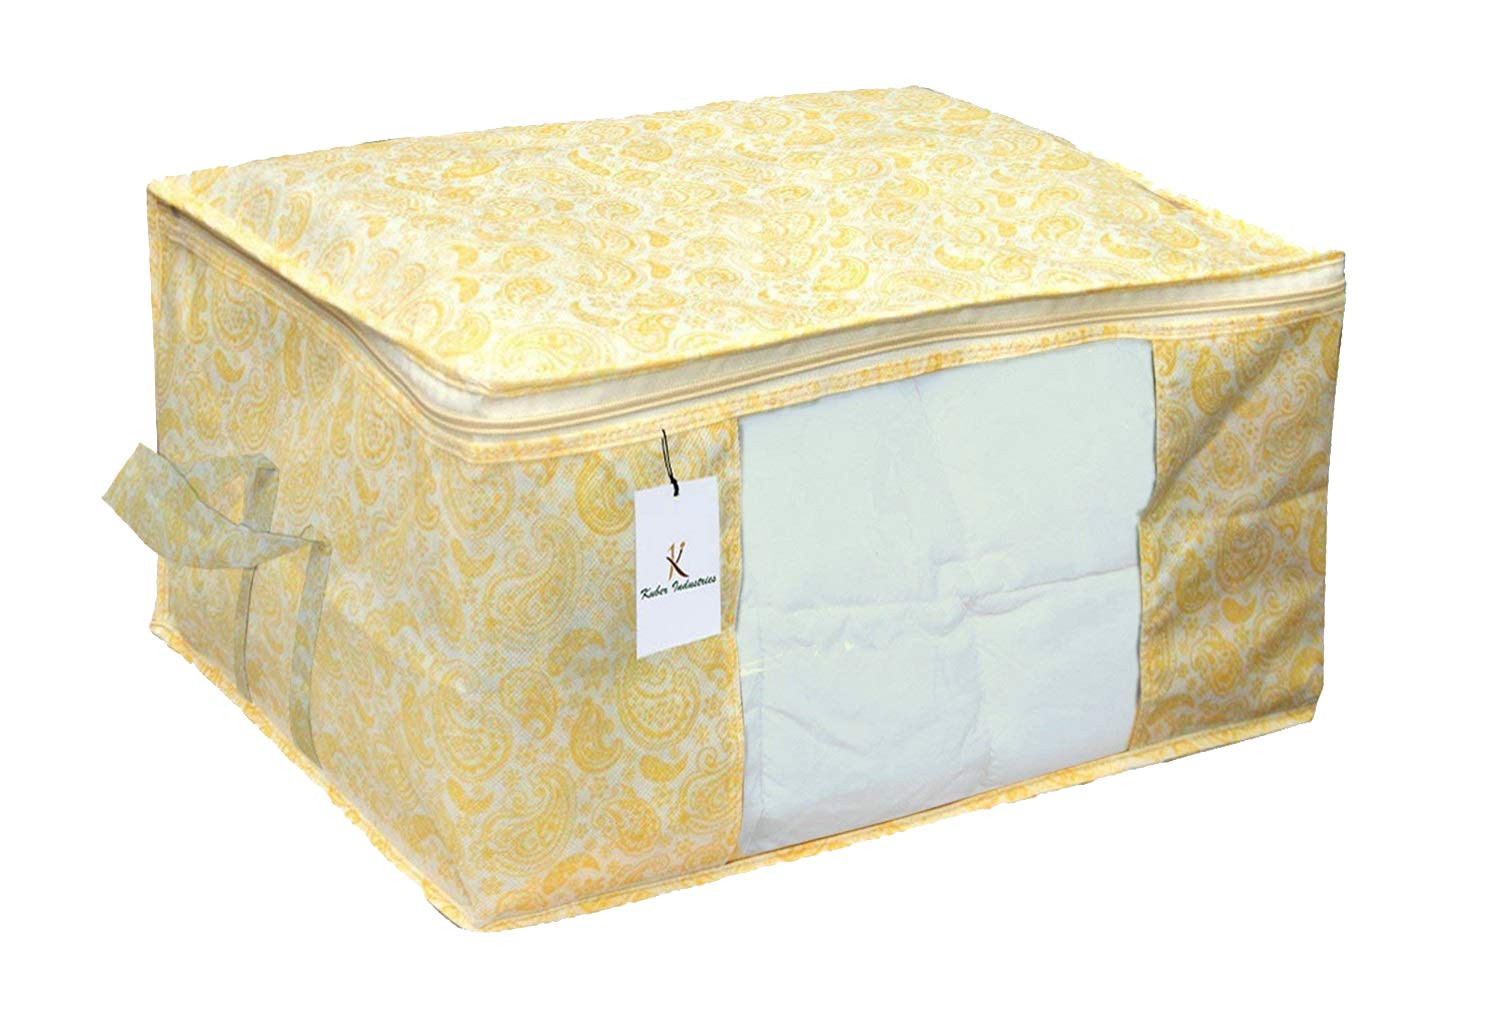 Kuber Industries Metalic Printed Non Woven Fabric Underbed Storage Bag,Cloth Organiser,Blanket Cover with Transparent Window, Golden Brown & Gold -CTKTC41059